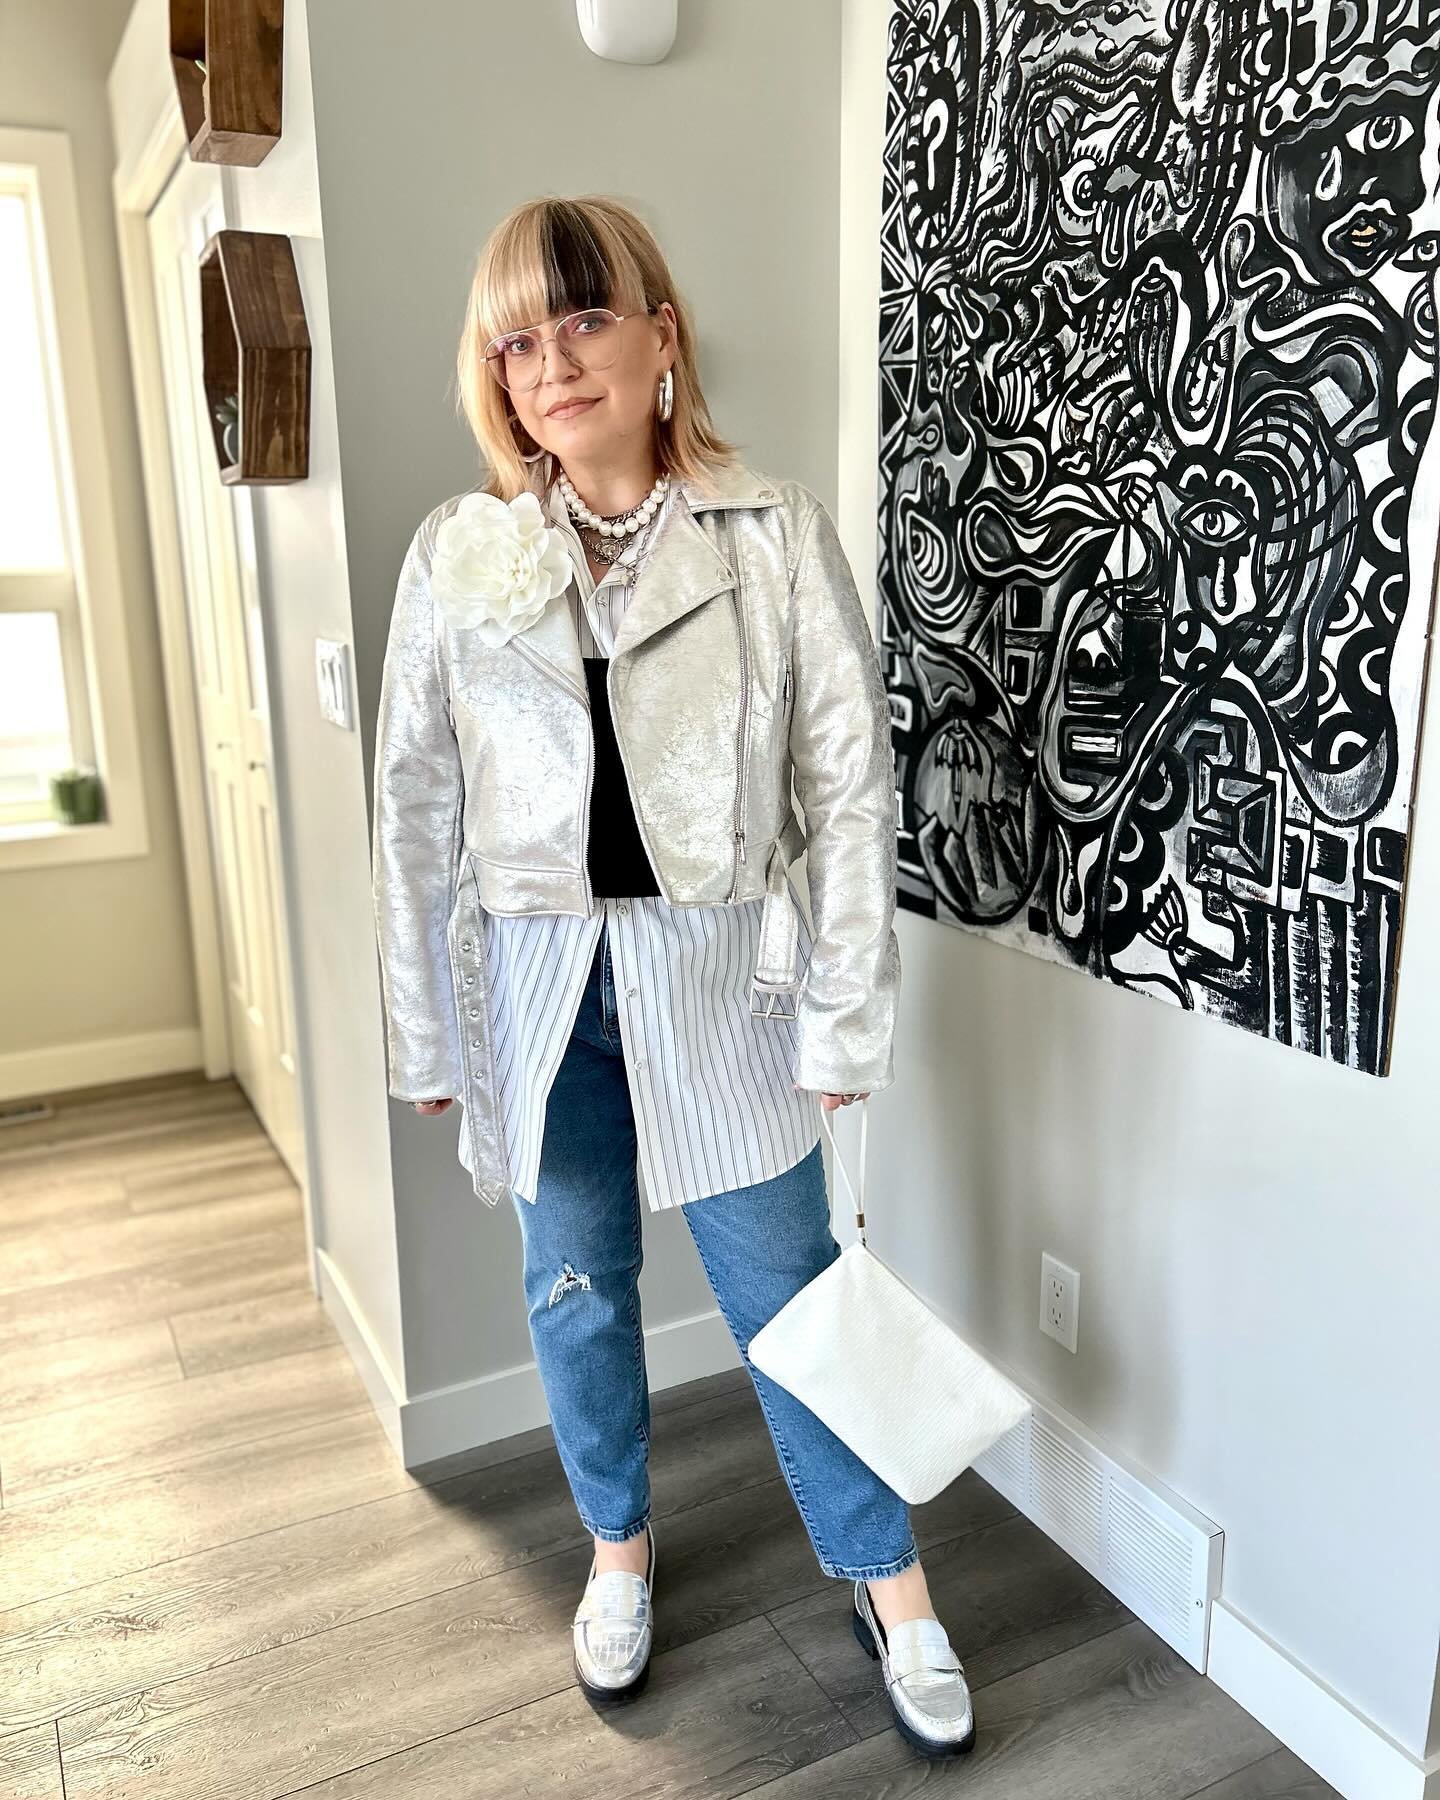 I wasn&rsquo;t joking when I said I was all about the metallic trend - Do you think this is enough metallic though? 🤍

#aldonabcreative #publicist #personalstylist #photographer #yycnow #yyc #yycstyle #personalstyle #ootd #styleinspo #spring #spring